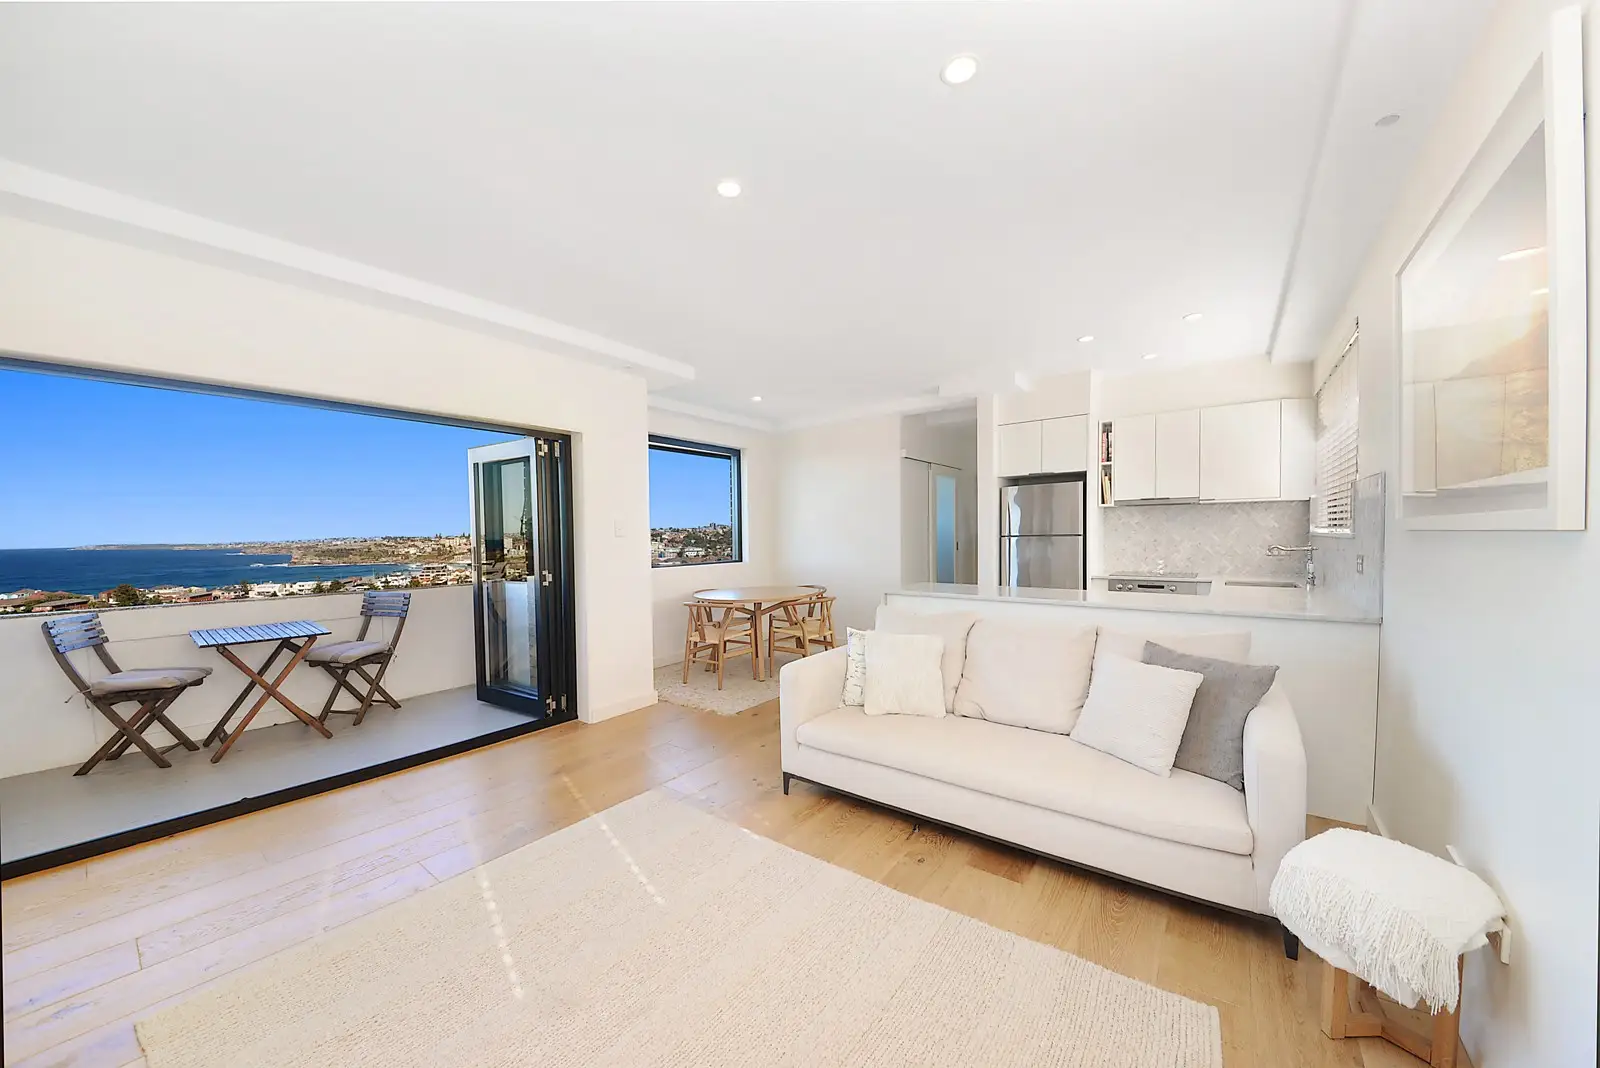 6/38 Military Road, North Bondi Leased by Sydney Sotheby's International Realty - image 1